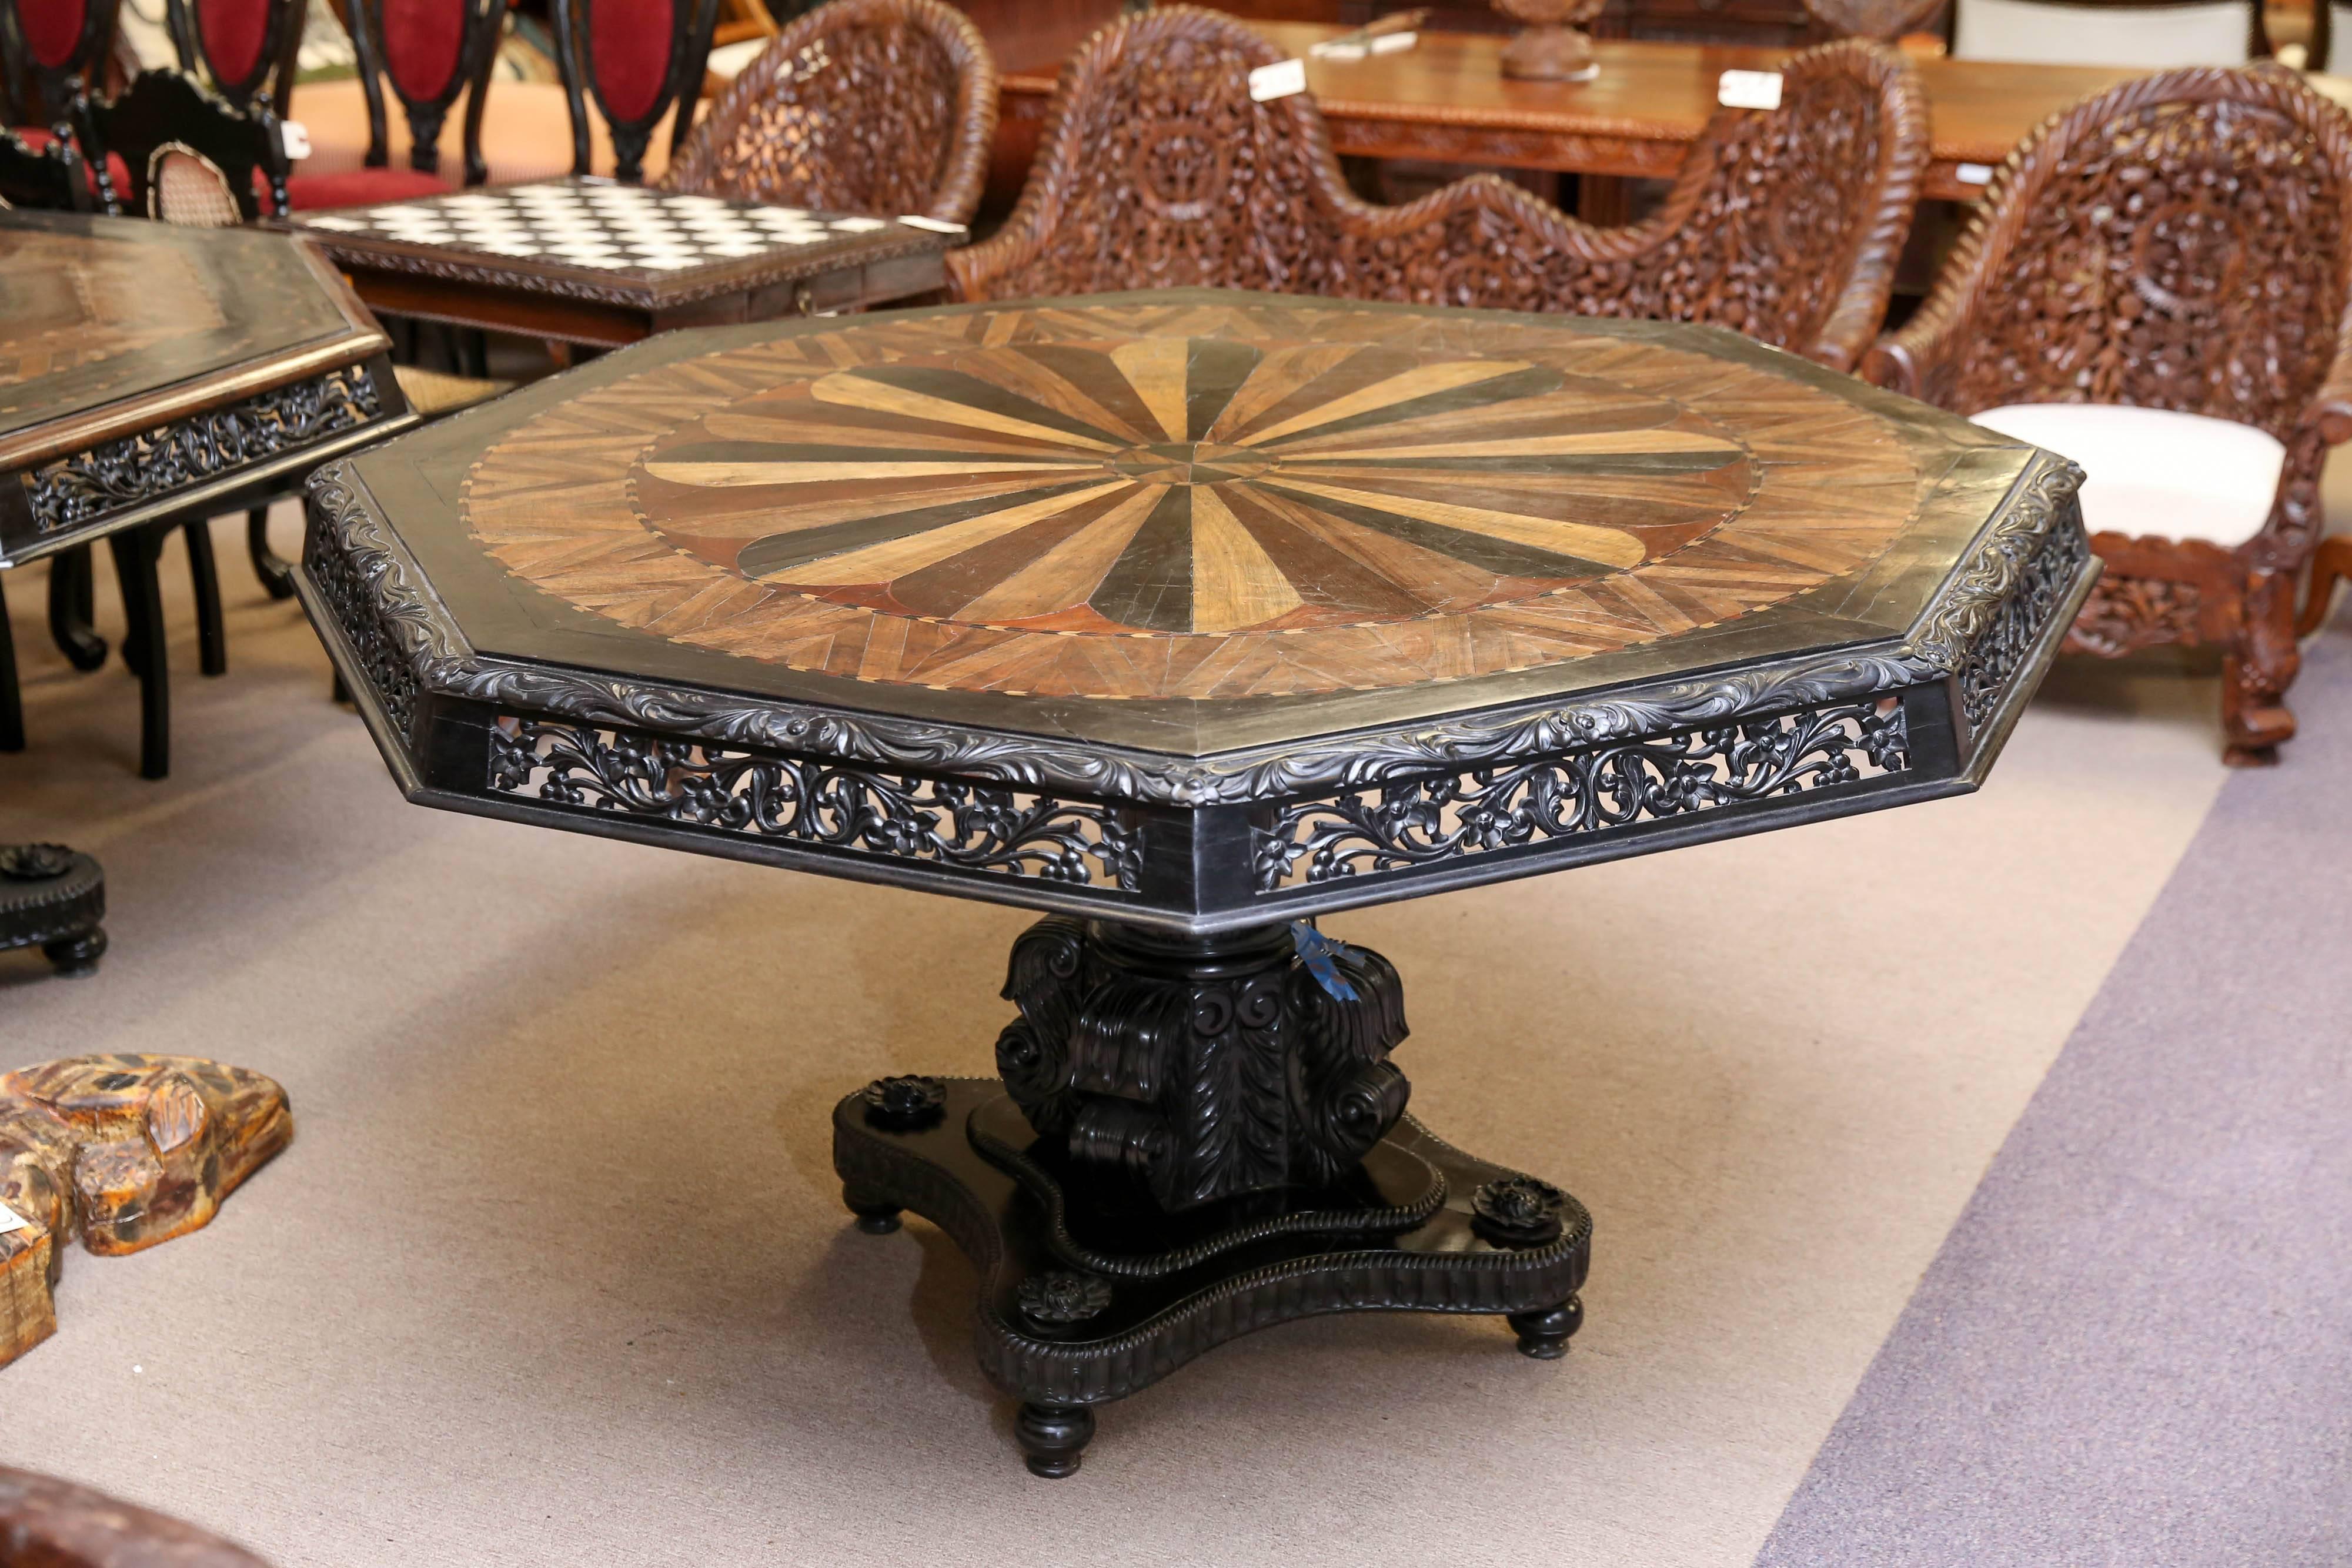 A rarest of rare mid-19th century solid ebony specimen wood table from Galle district of Sri Lanka. The table was made on commission by fine artisans for the Dutch settlers who owned coffee plantations in Sri Lanka. Sri Lankan craftsmen are known